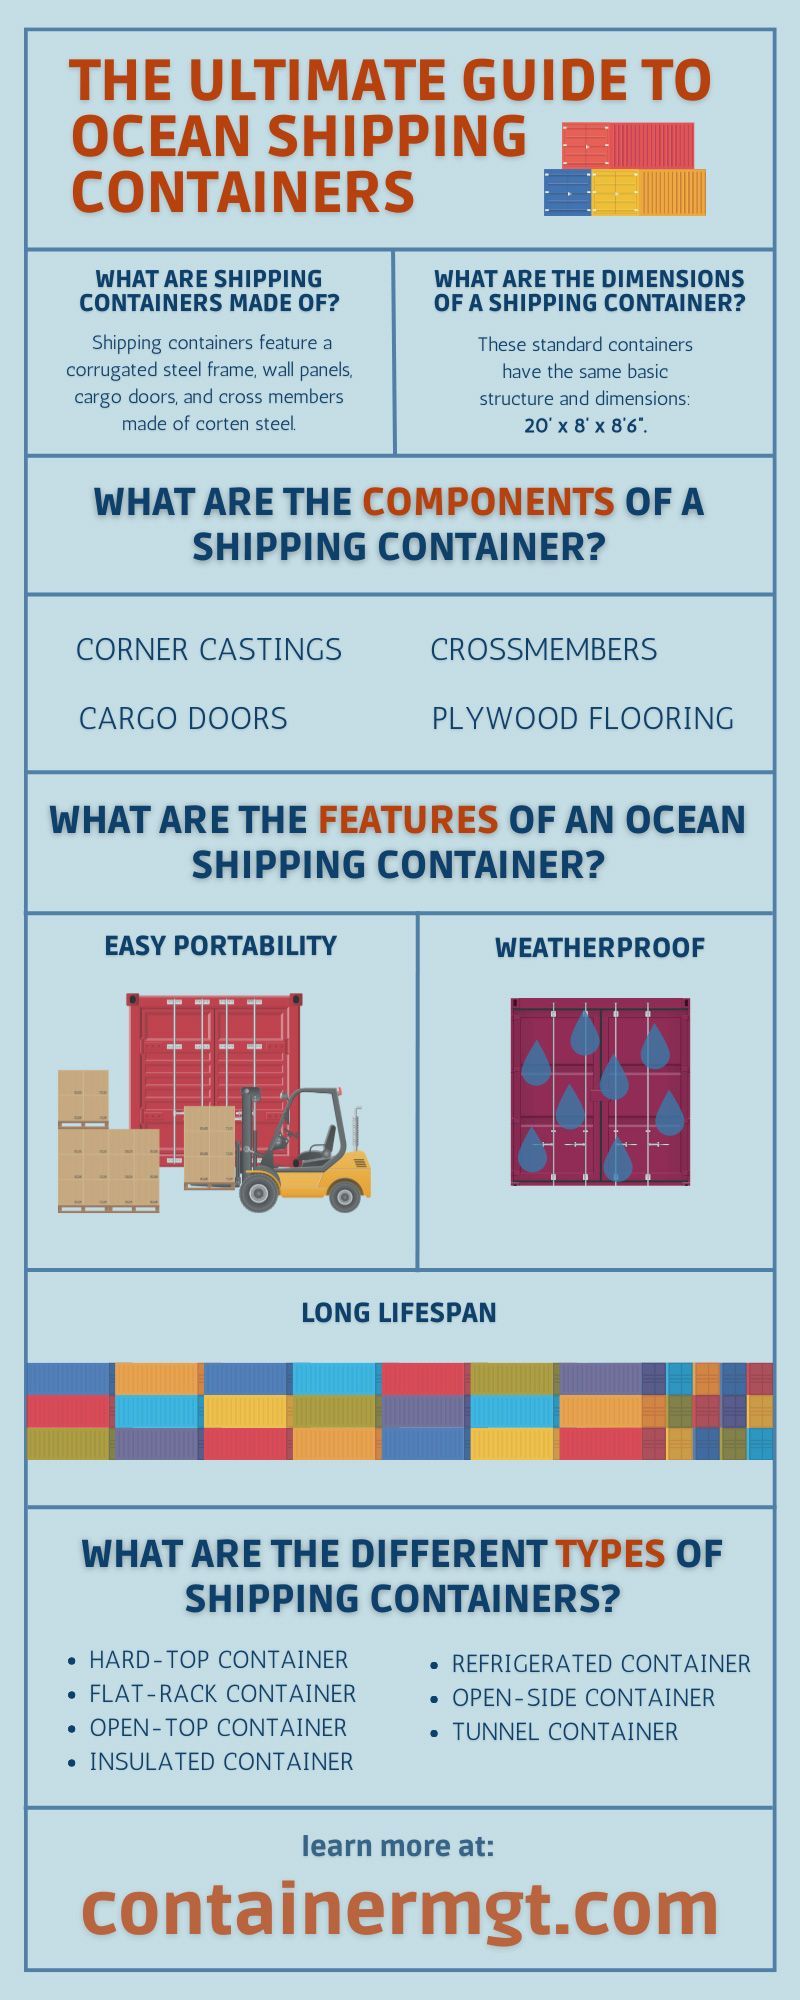 The Ultimate Guide to Ocean Shipping Containers